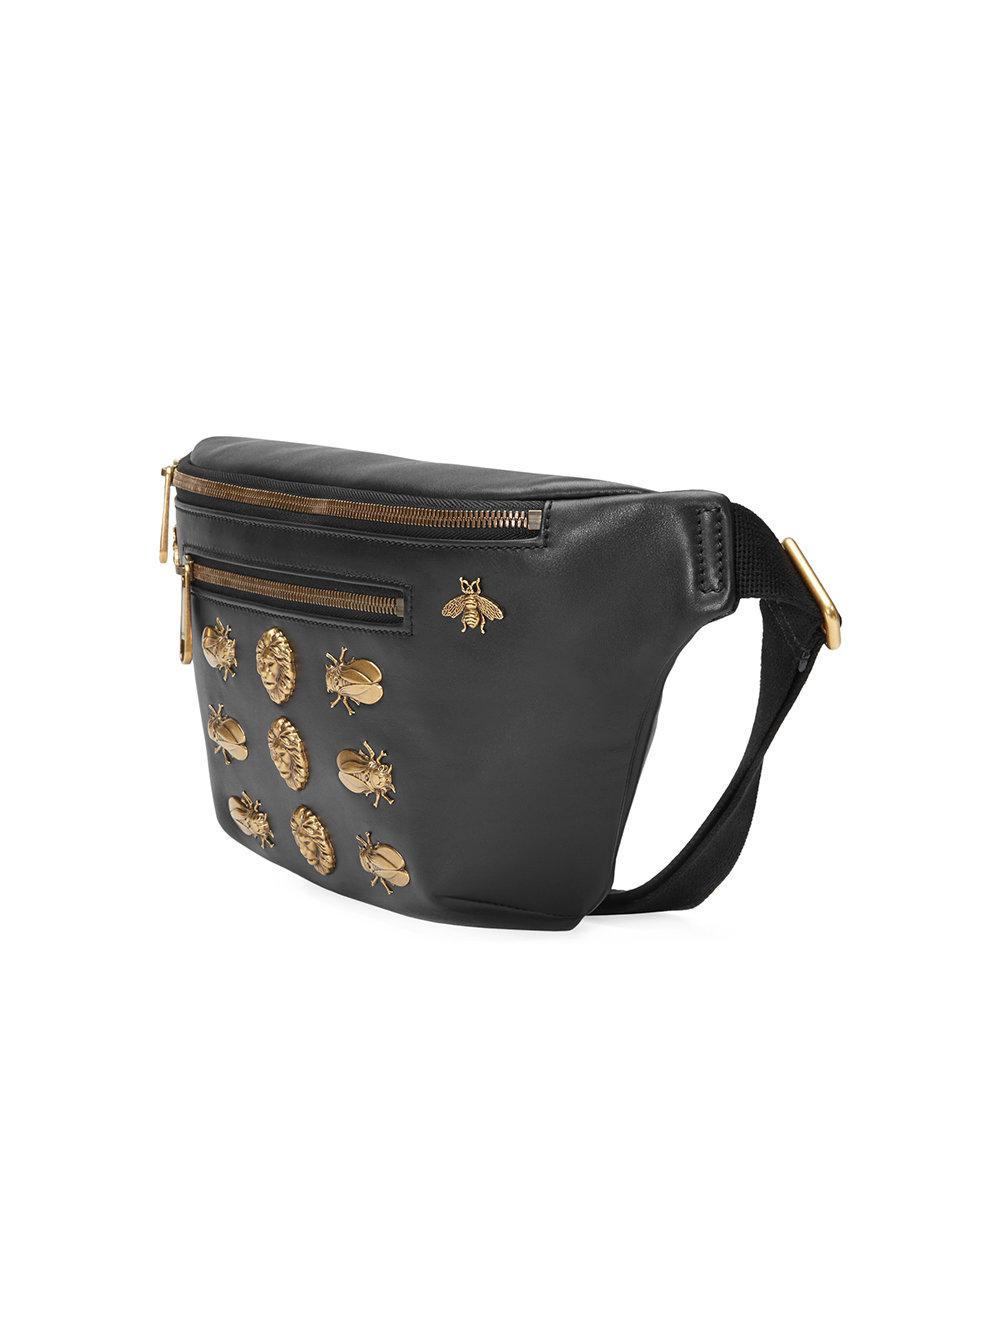 Lyst - Gucci Leather Belt Bag With Animal Studs in Black for Men